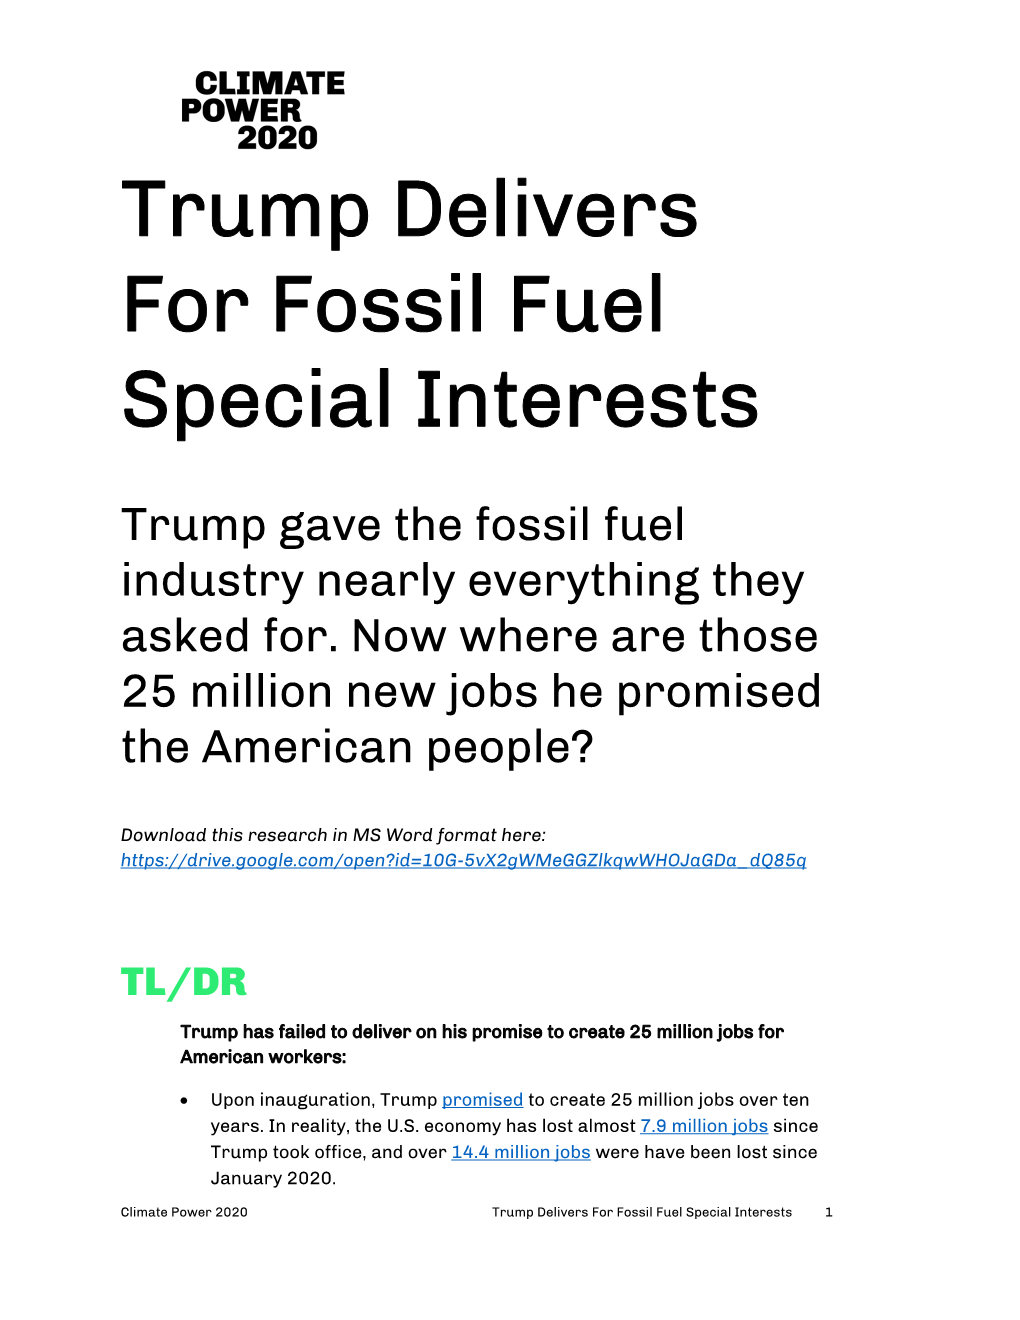 Trump Delivers for Fossil Fuel Special Interests